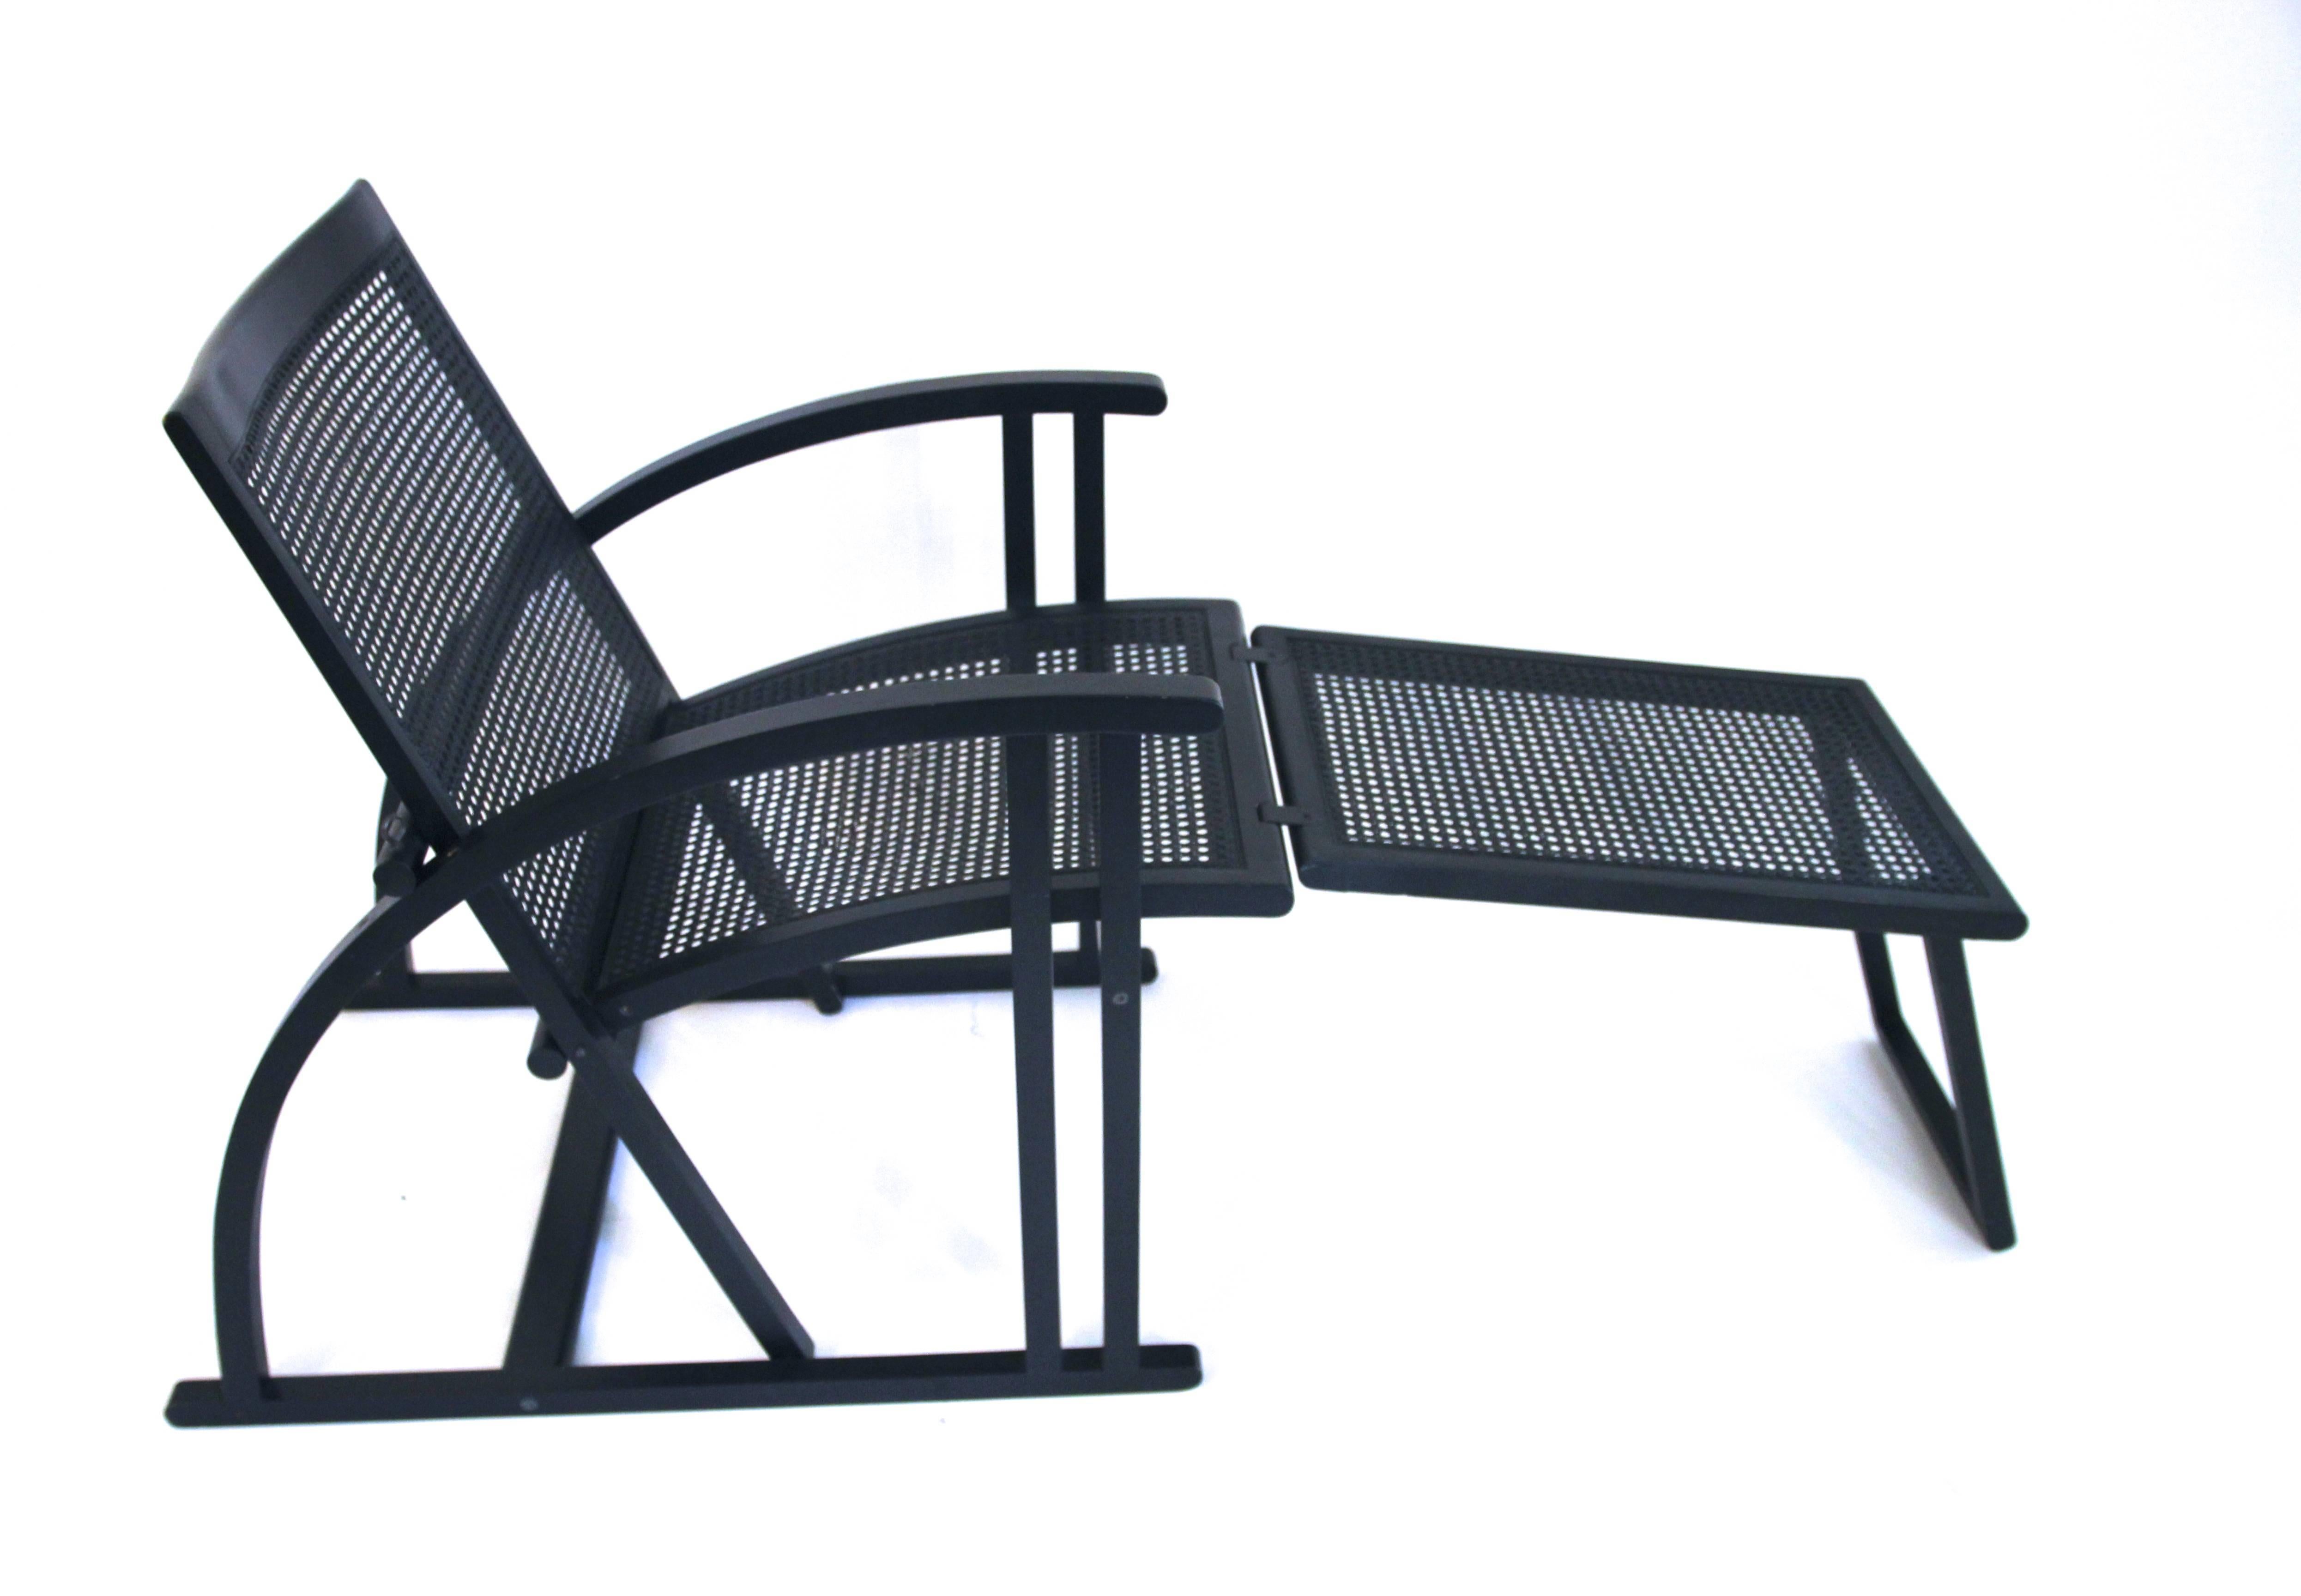 Pascal Mourgue, armchair with its footrest,
Model ARC, edition Pamco Triconfort,
Black wood and rattan,
circa 1983, France.
Measures: Height: 80 cm, seat height: 45 cm, width: 58 cm, depth: 80 cm,
footrest: height: 45 cm, width: 37 cm, depth: